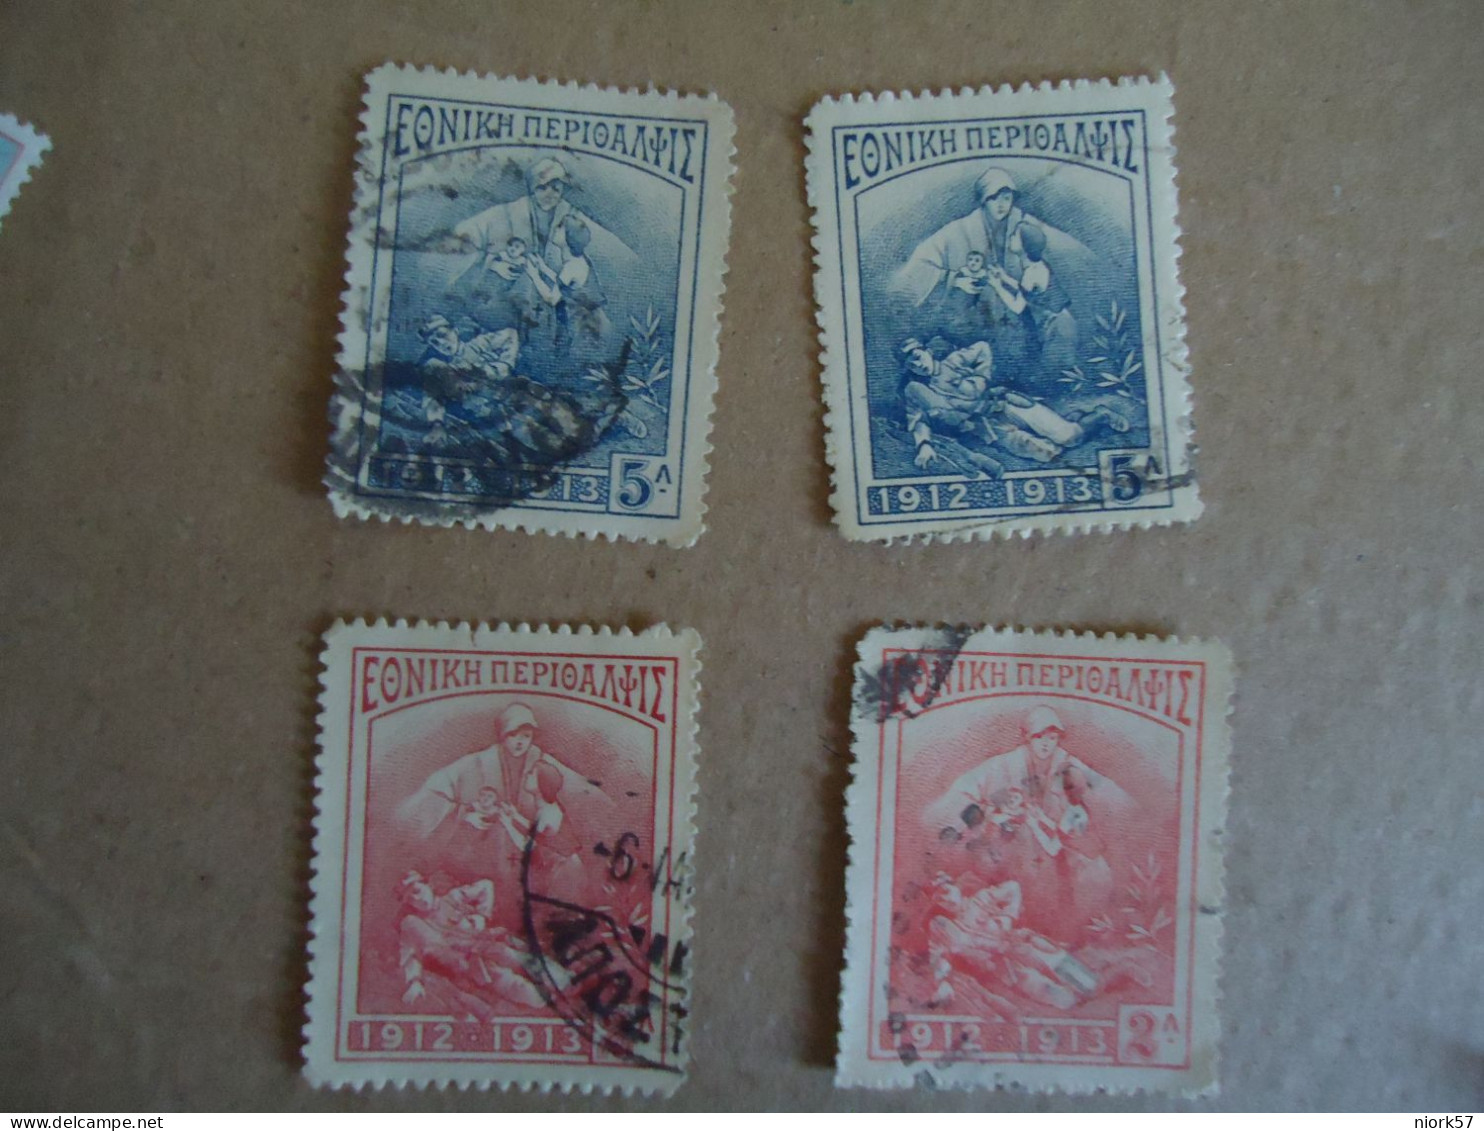 GREECE    POSTMARK ON STAMPS 2   ΣΕΤ  ΠΡΟΝΟΙΑ 1914  CHARITY - Affrancature Meccaniche Rosse (EMA)